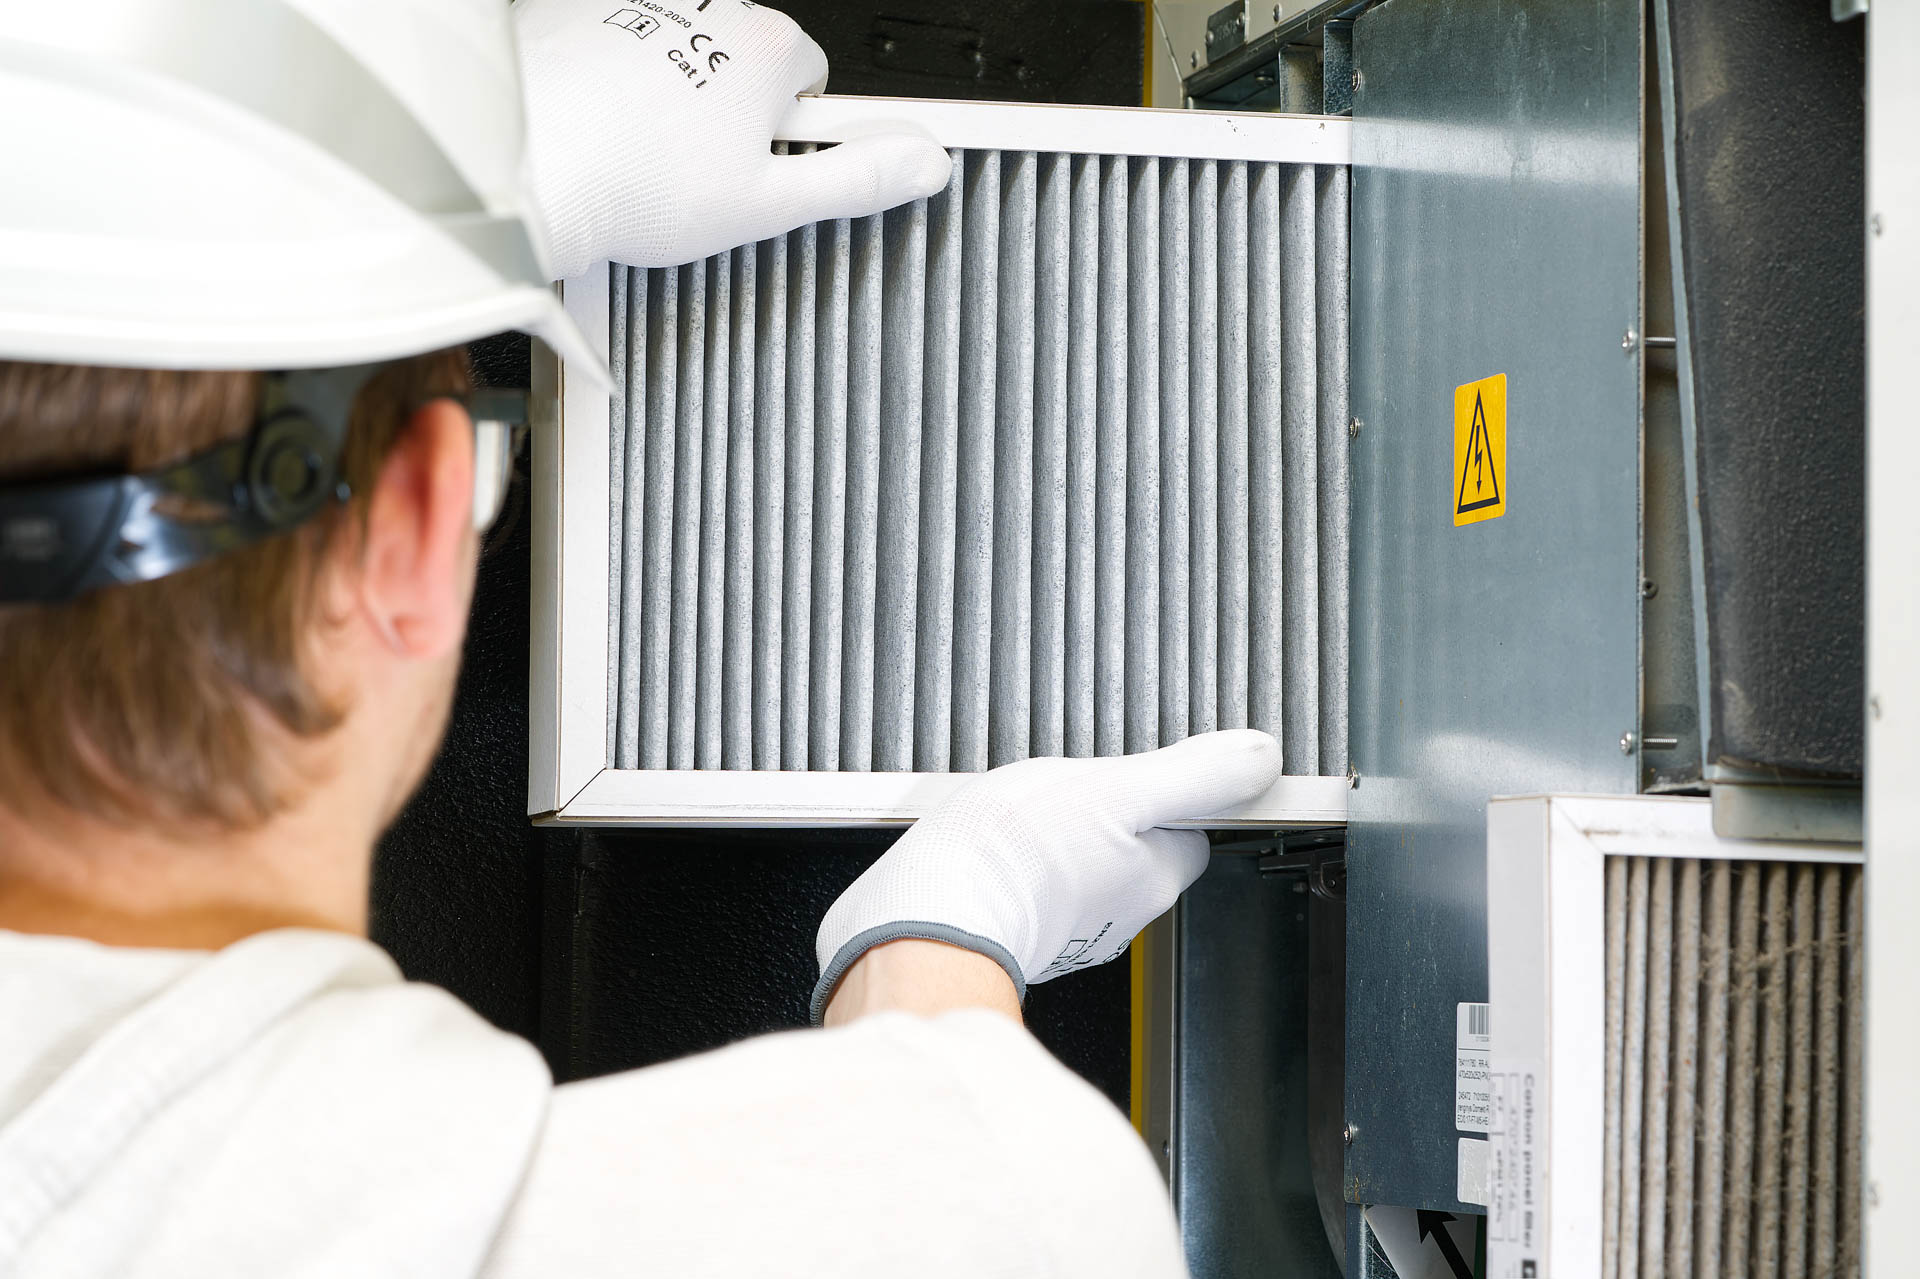 A technician wearing safety gloves and a helmet is inspecting or changing an air filter in a large hvac unit.